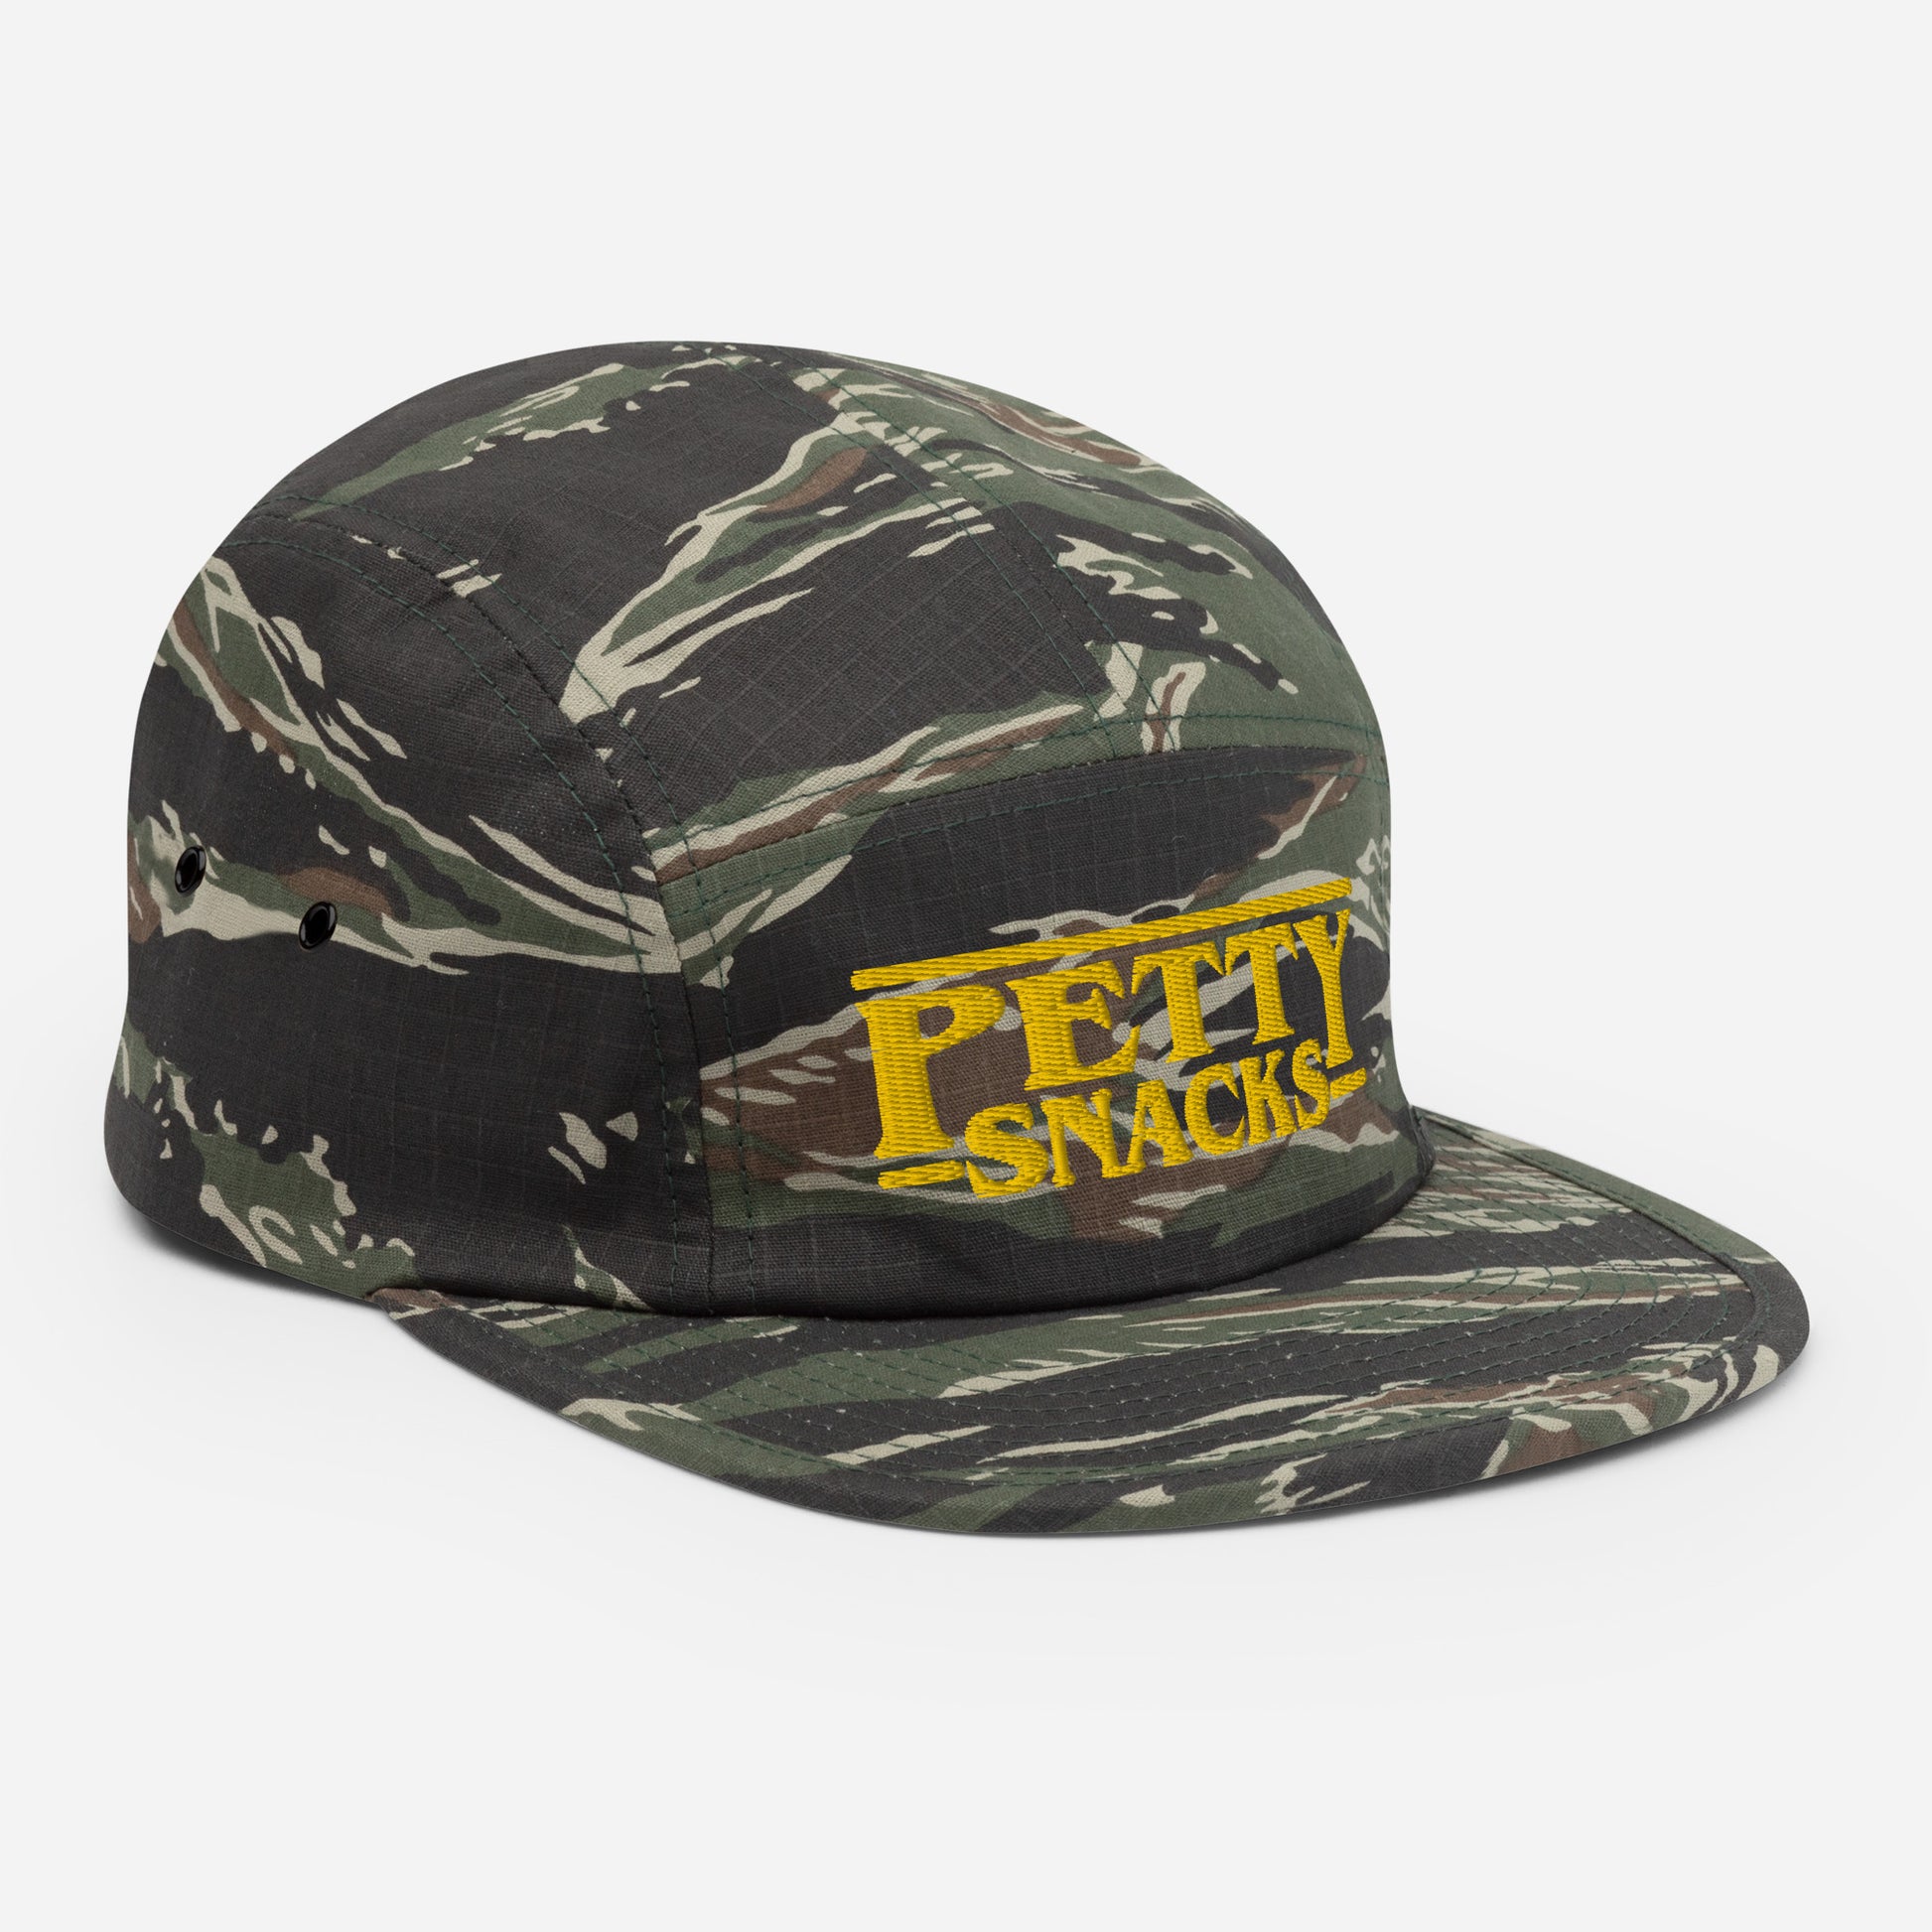 A side view of a green tiger-camo five-panel hat with embroidered lettering in front center. Letterings says "Petty Snacks" in yellow with a line on top and bottom of the words. In the style of film credits made famous by Tarantino.